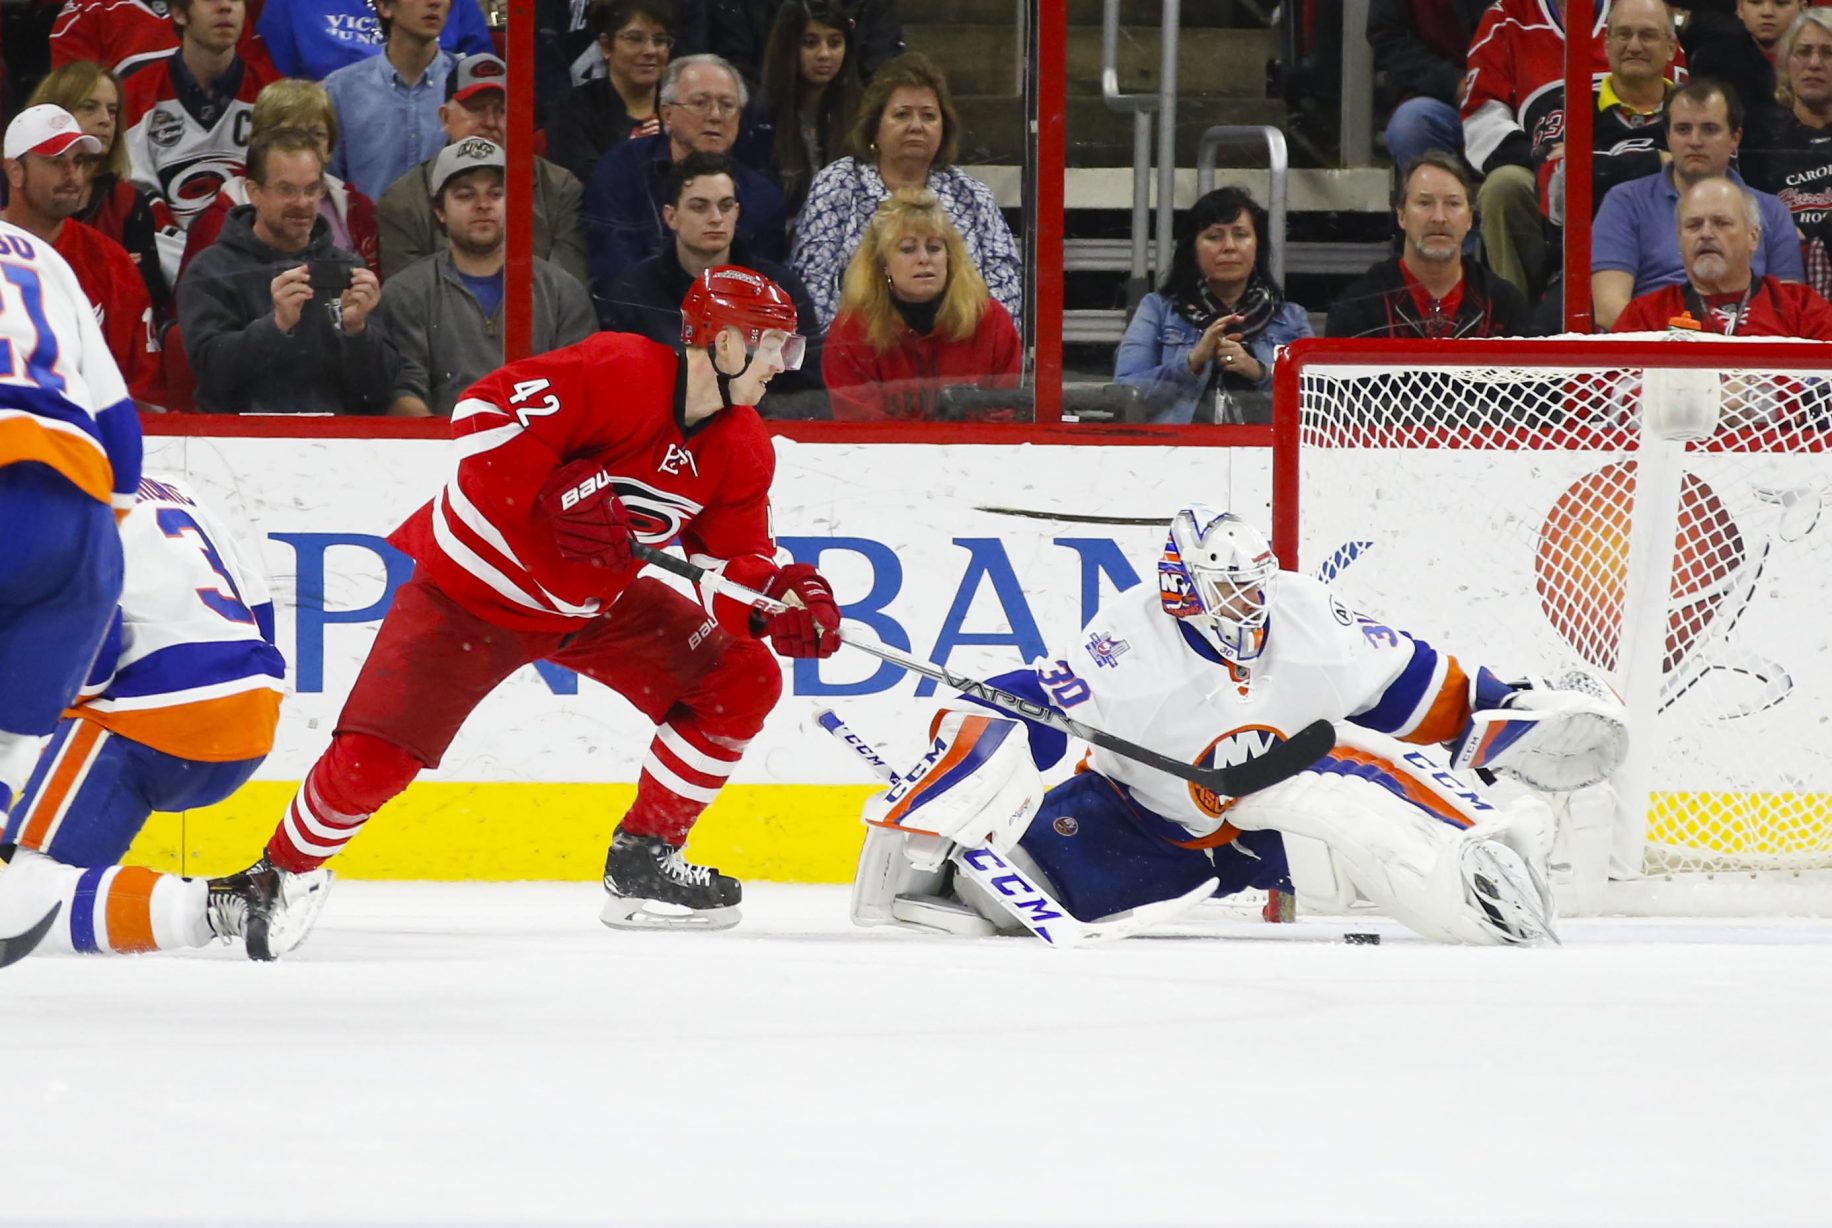 Similar script follows the New York Islanders in 5-4 loss in OT to Hurricanes (Highlights) 